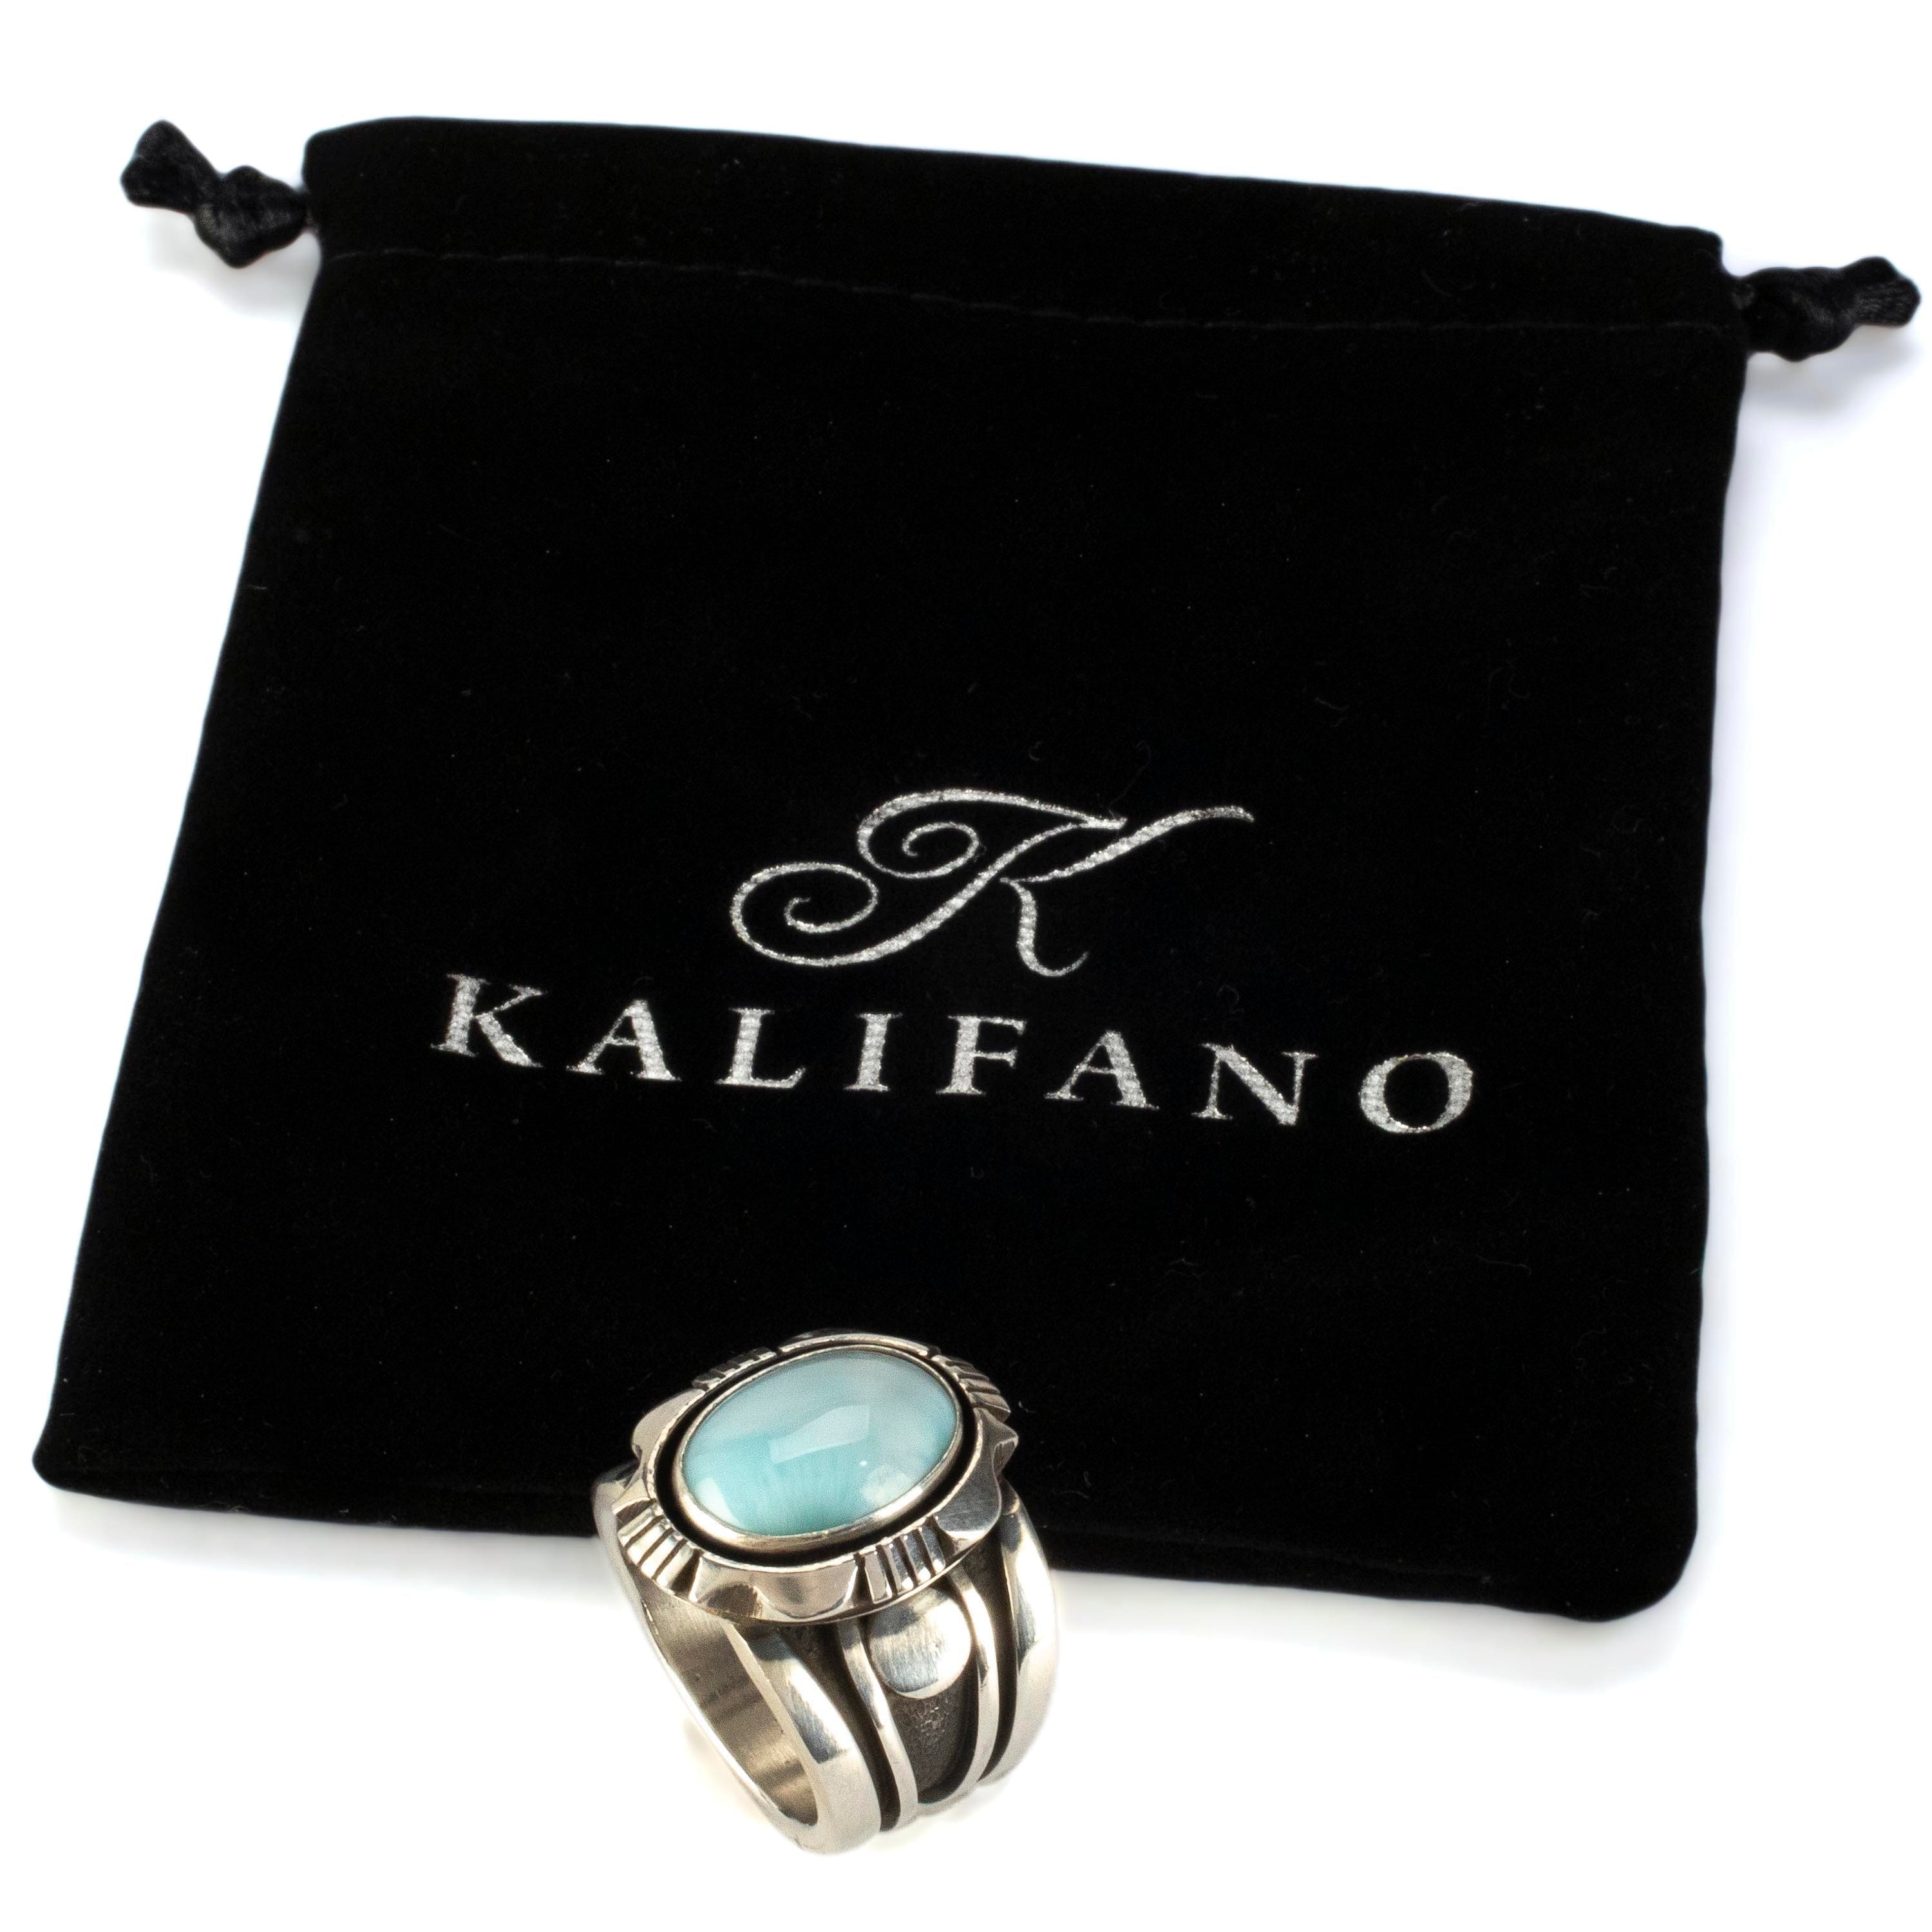 Kalifano Native American Jewelry Cooper Willie Navajo Larimar USA Native American Made 925 Sterling Silver Ring